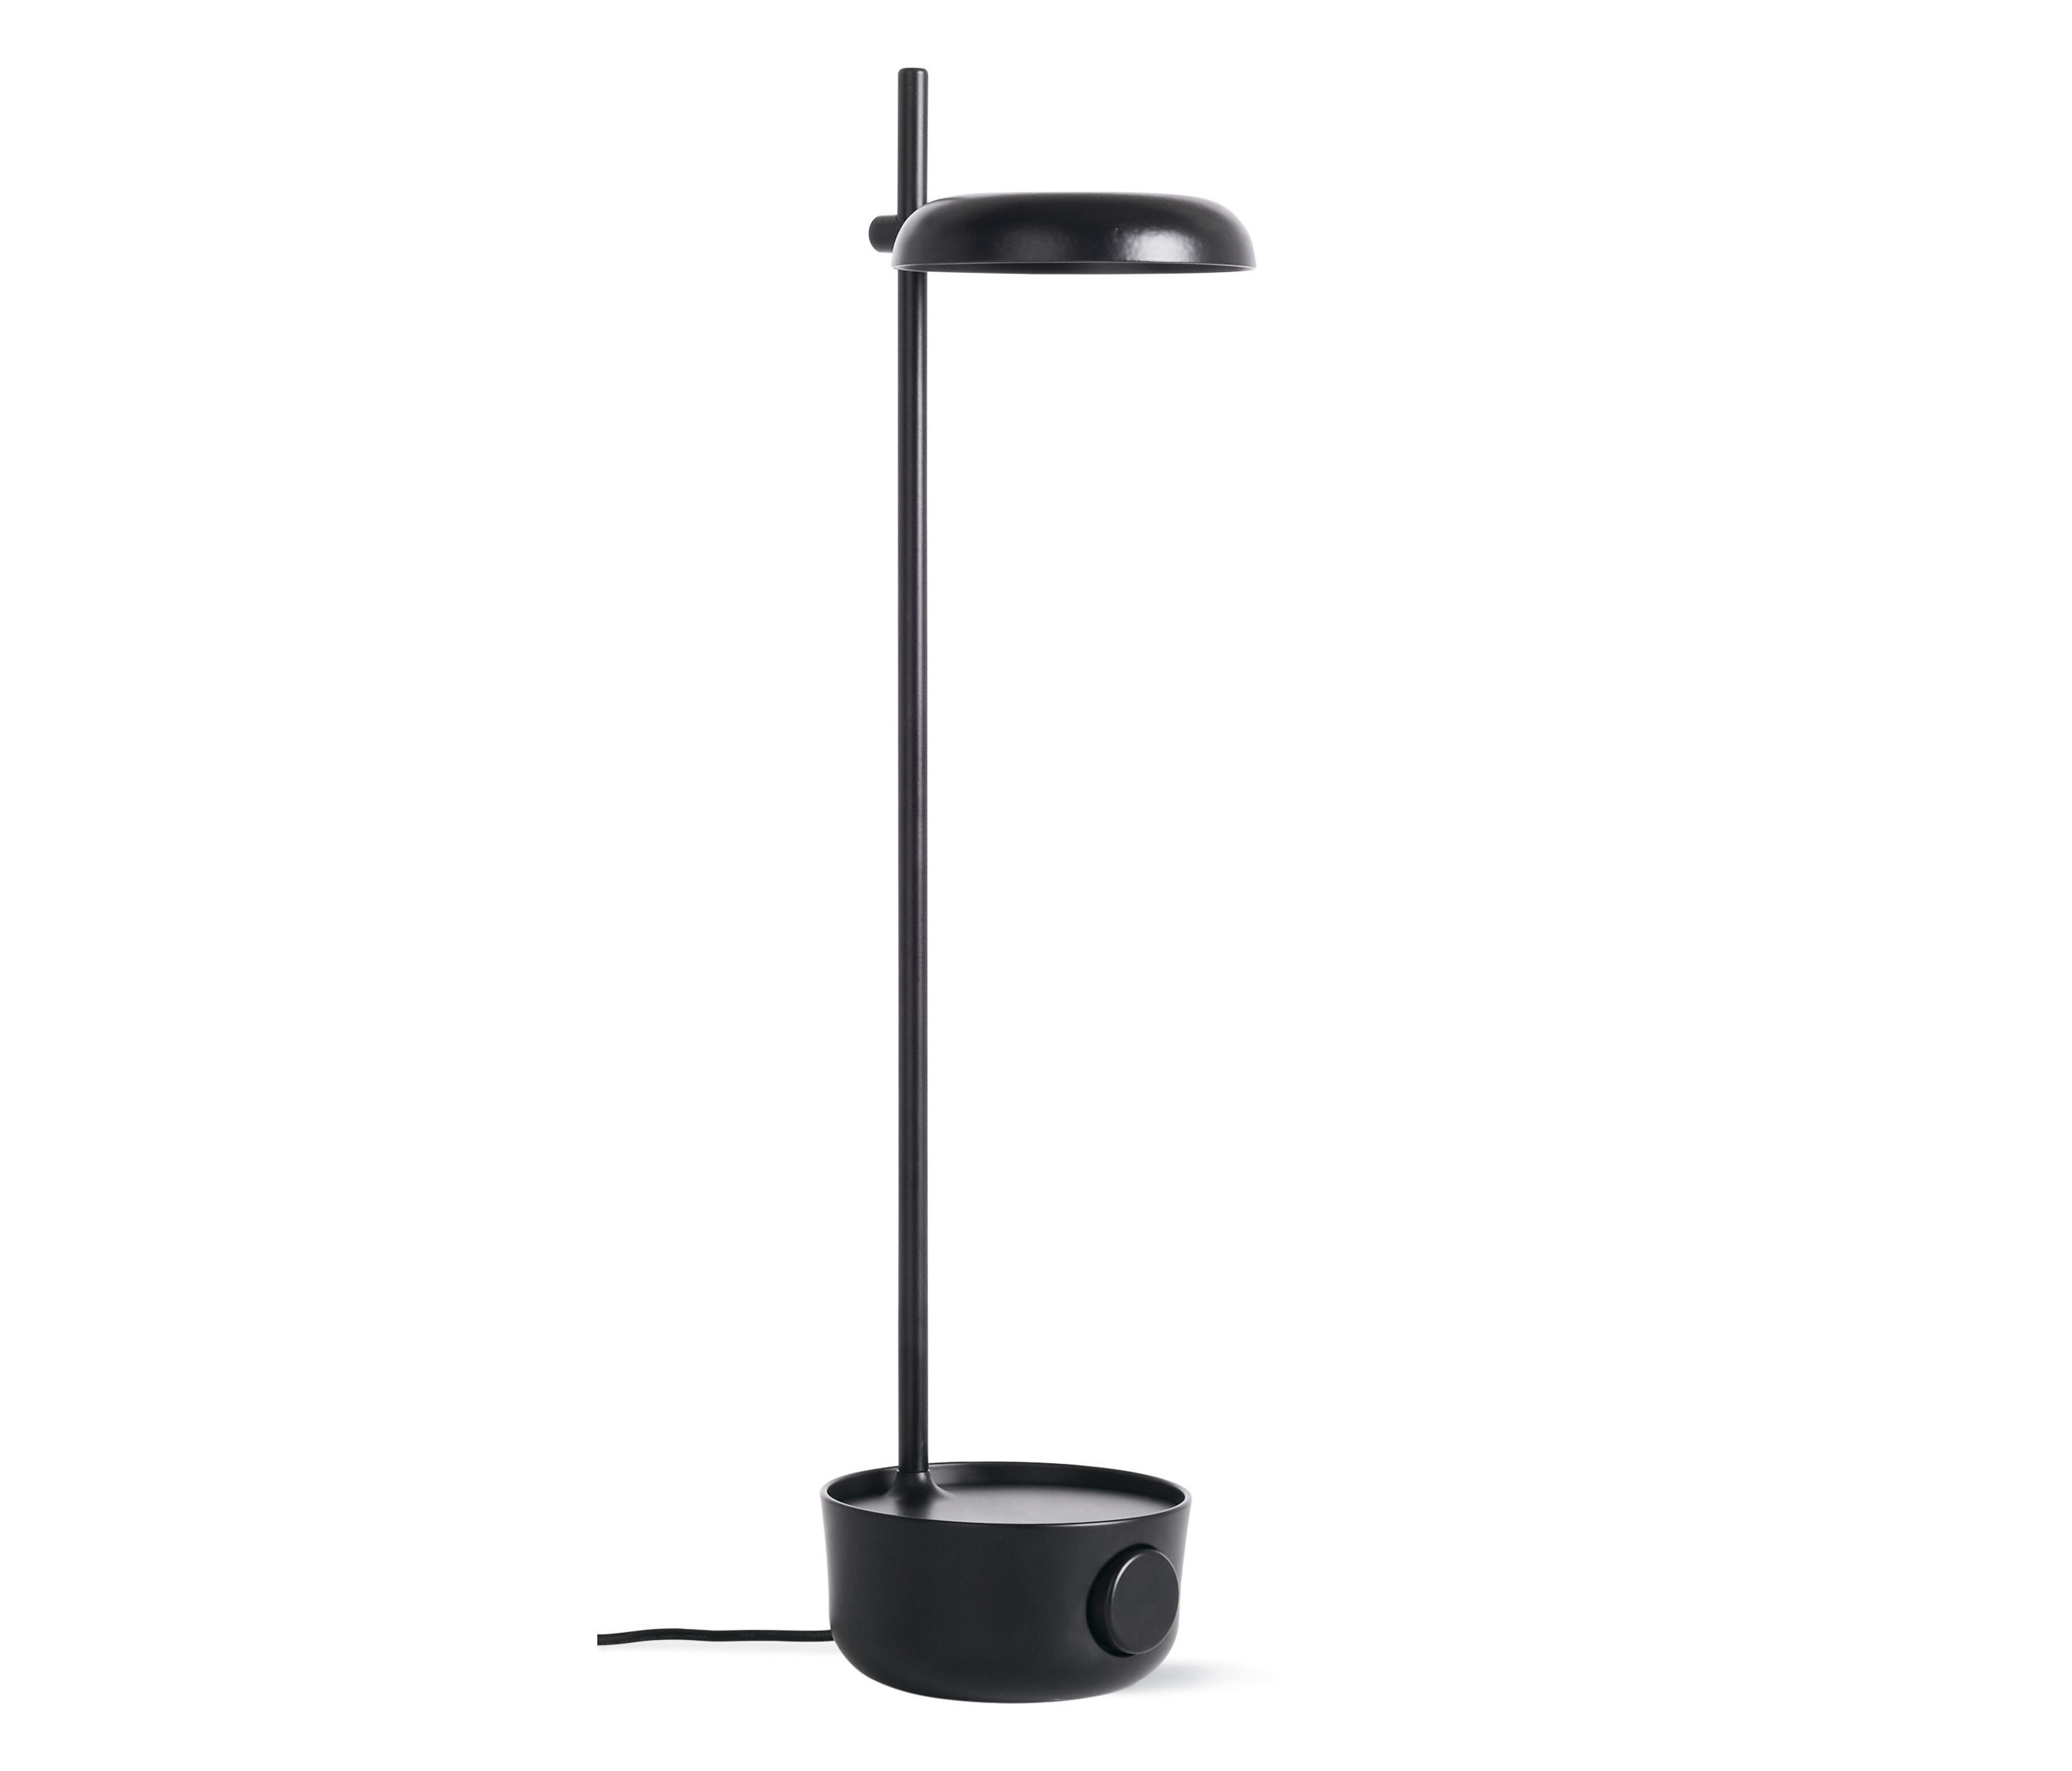 nægte Gammel mand er mere end Focal LED Lamp with USB Port | Architonic